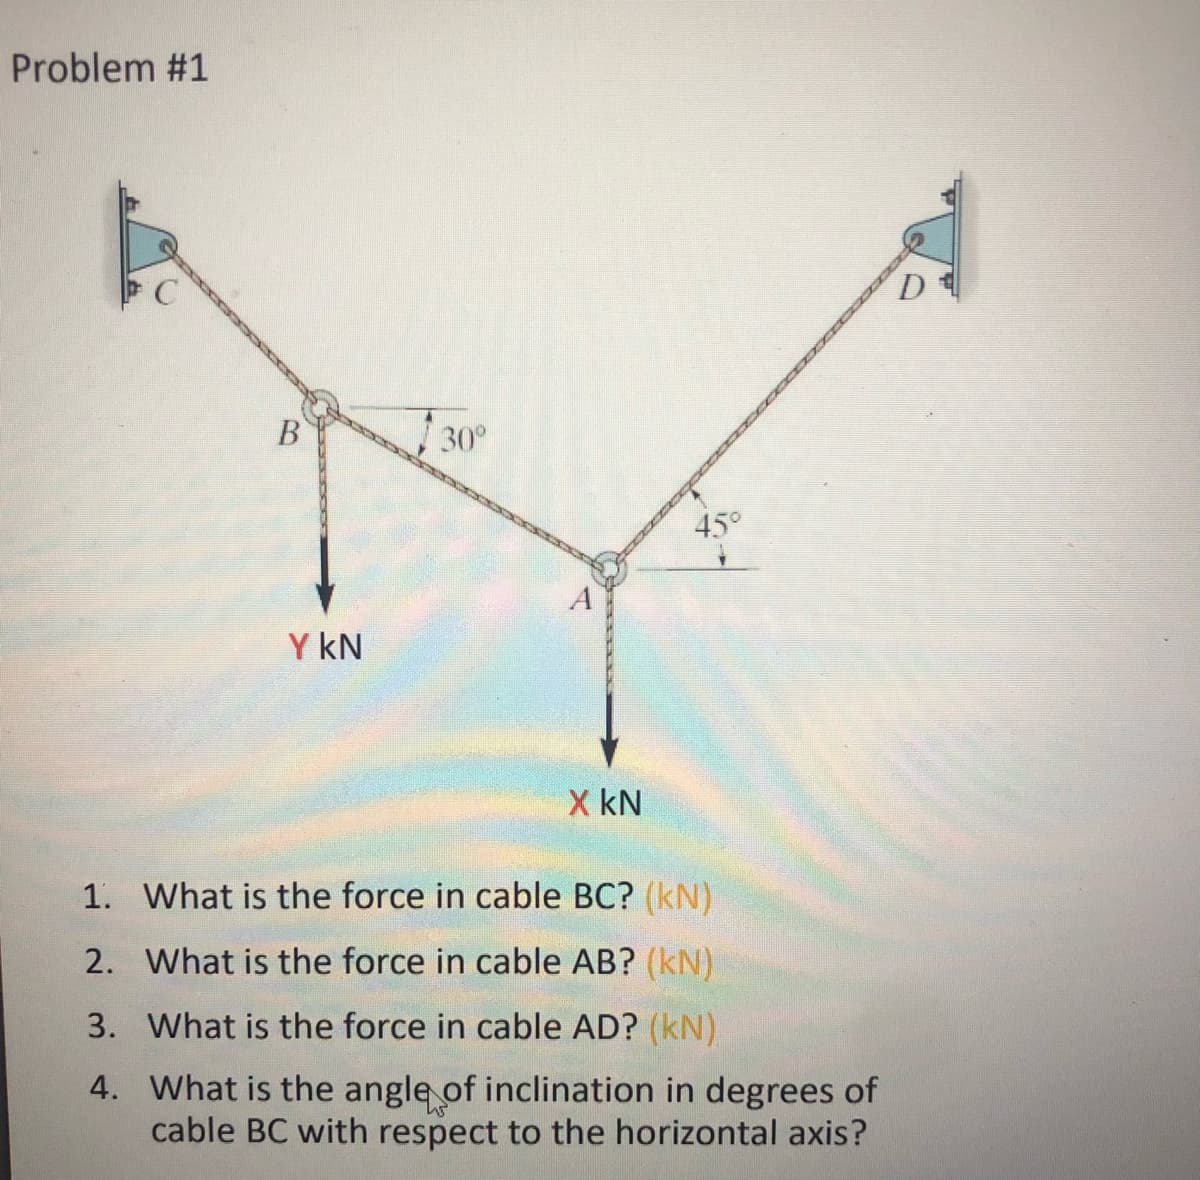 Problem #1
B
30°
45°
Y KN
X KN
1. What is the force in cable BC? (kN)
2.
What is the force in cable AB? (kN)
3.
What is the force in cable AD? (kN)
4. What is the angle of inclination in degrees of
cable BC with respect to the horizontal axis?
D